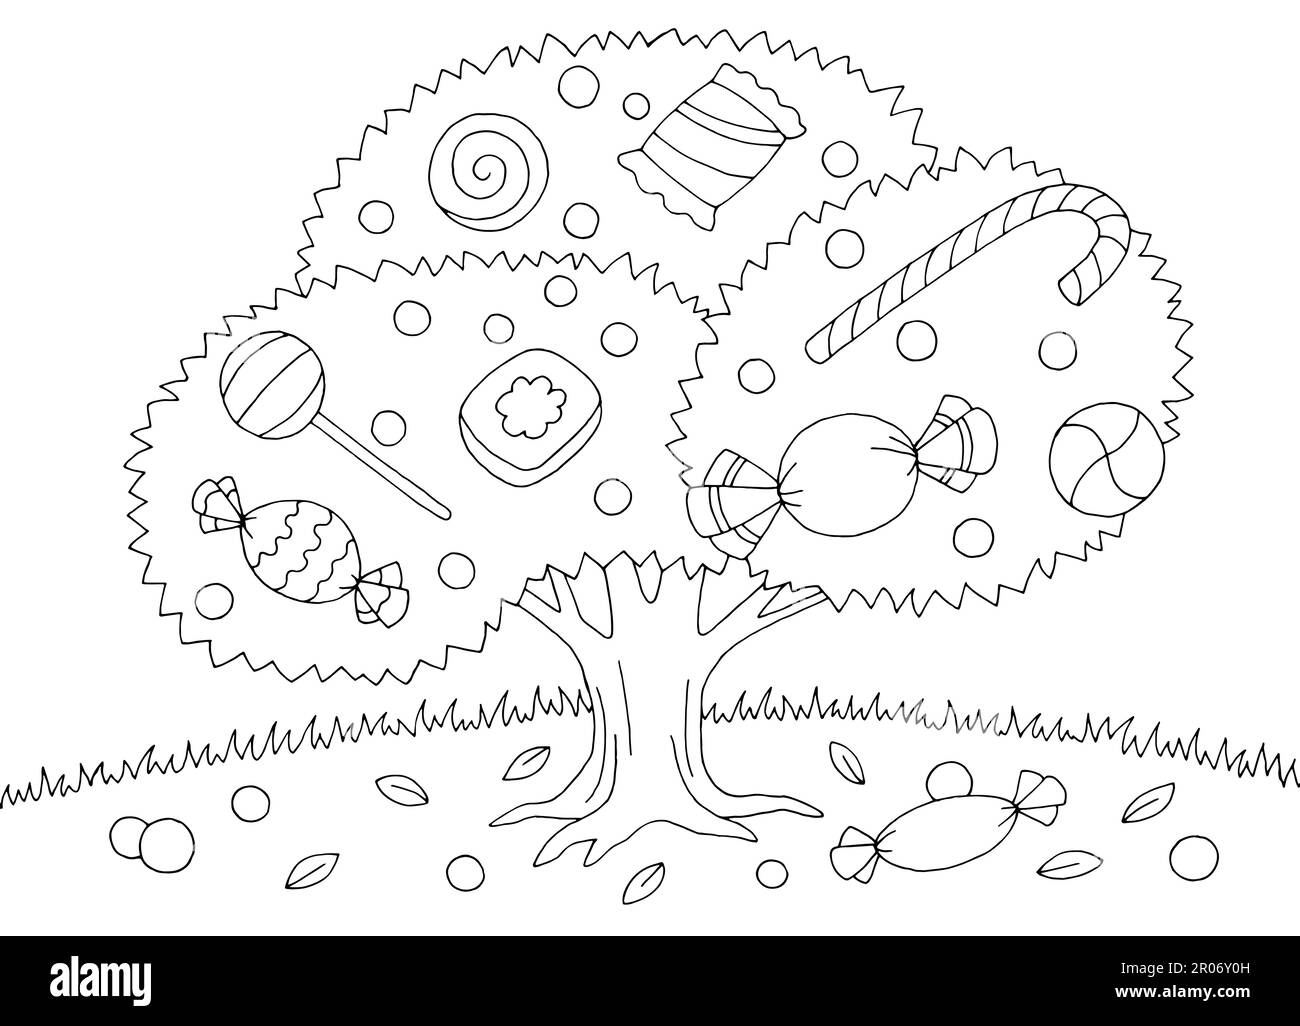 Candy tree graphic black white coloring landscape sketch illustration vector Stock Vector